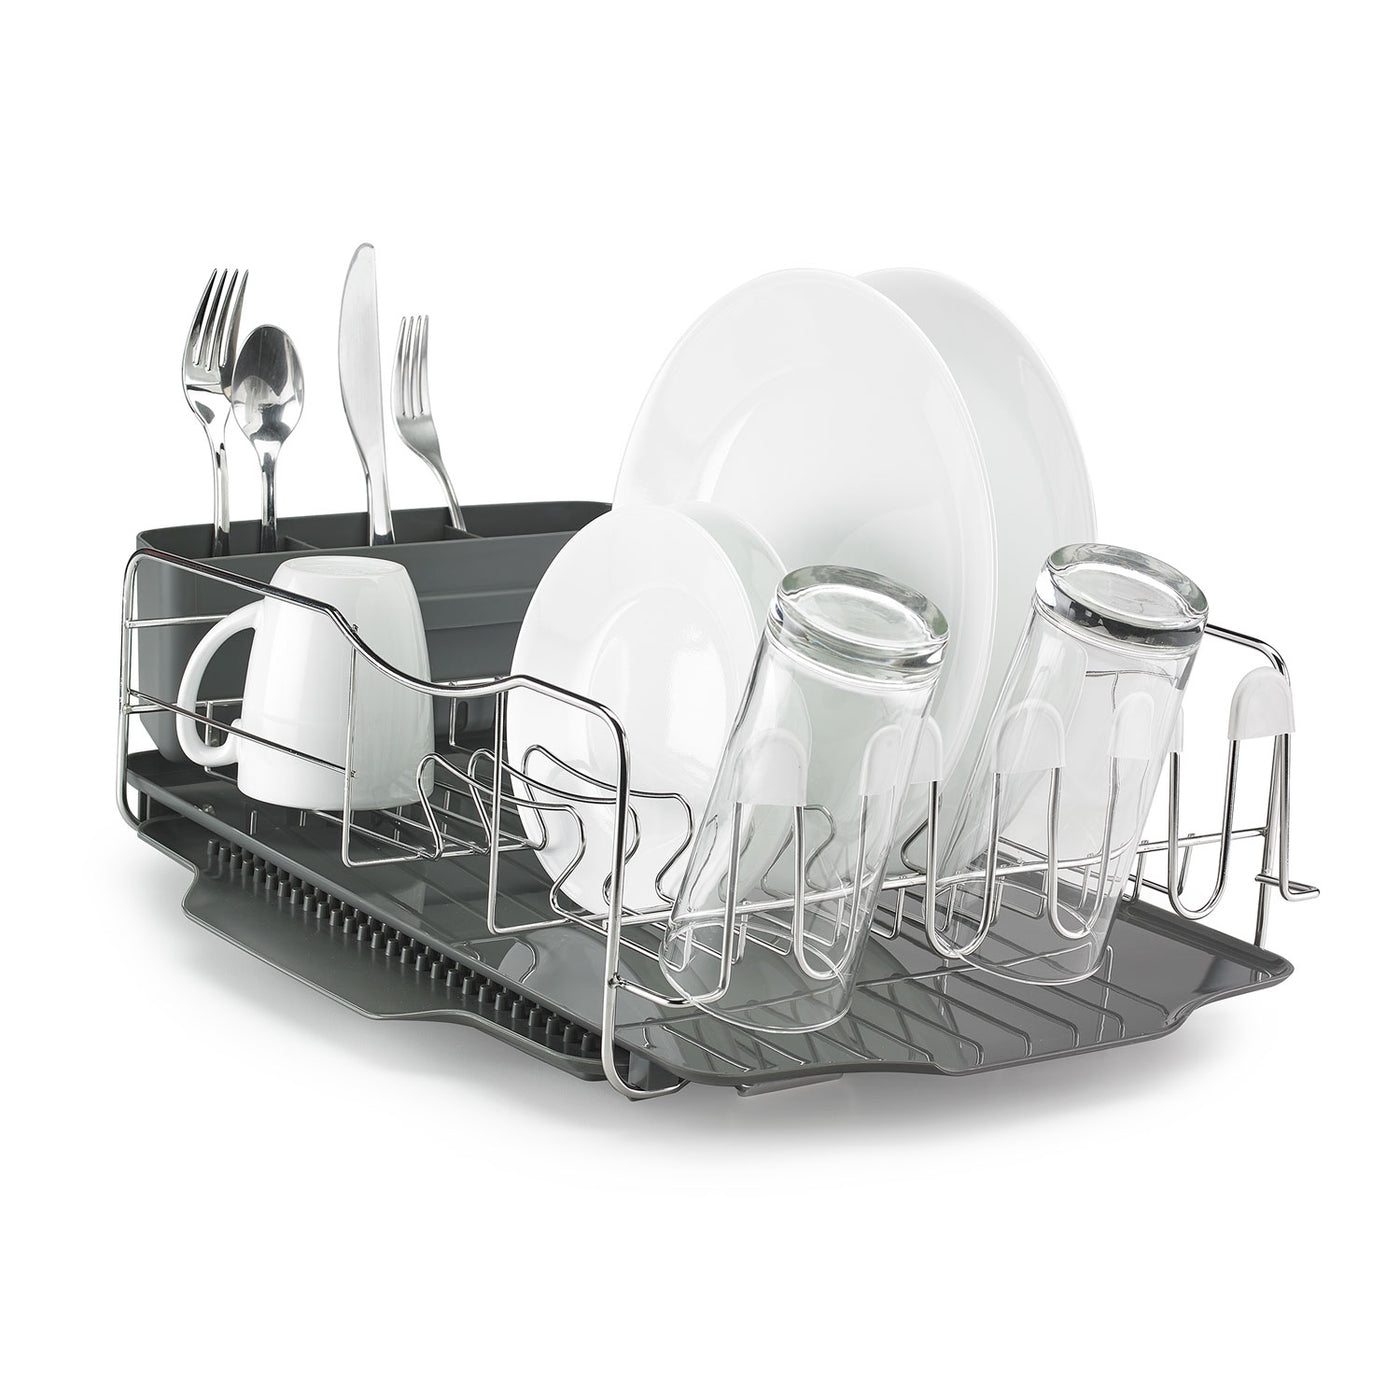 Polder Advantage Pro 4-Piece Dish Rack, Removable Slide-Out Tray, Designed for Optimal Draining, Large Capacity, Soft-Touch Rubber Caps Is Safe to